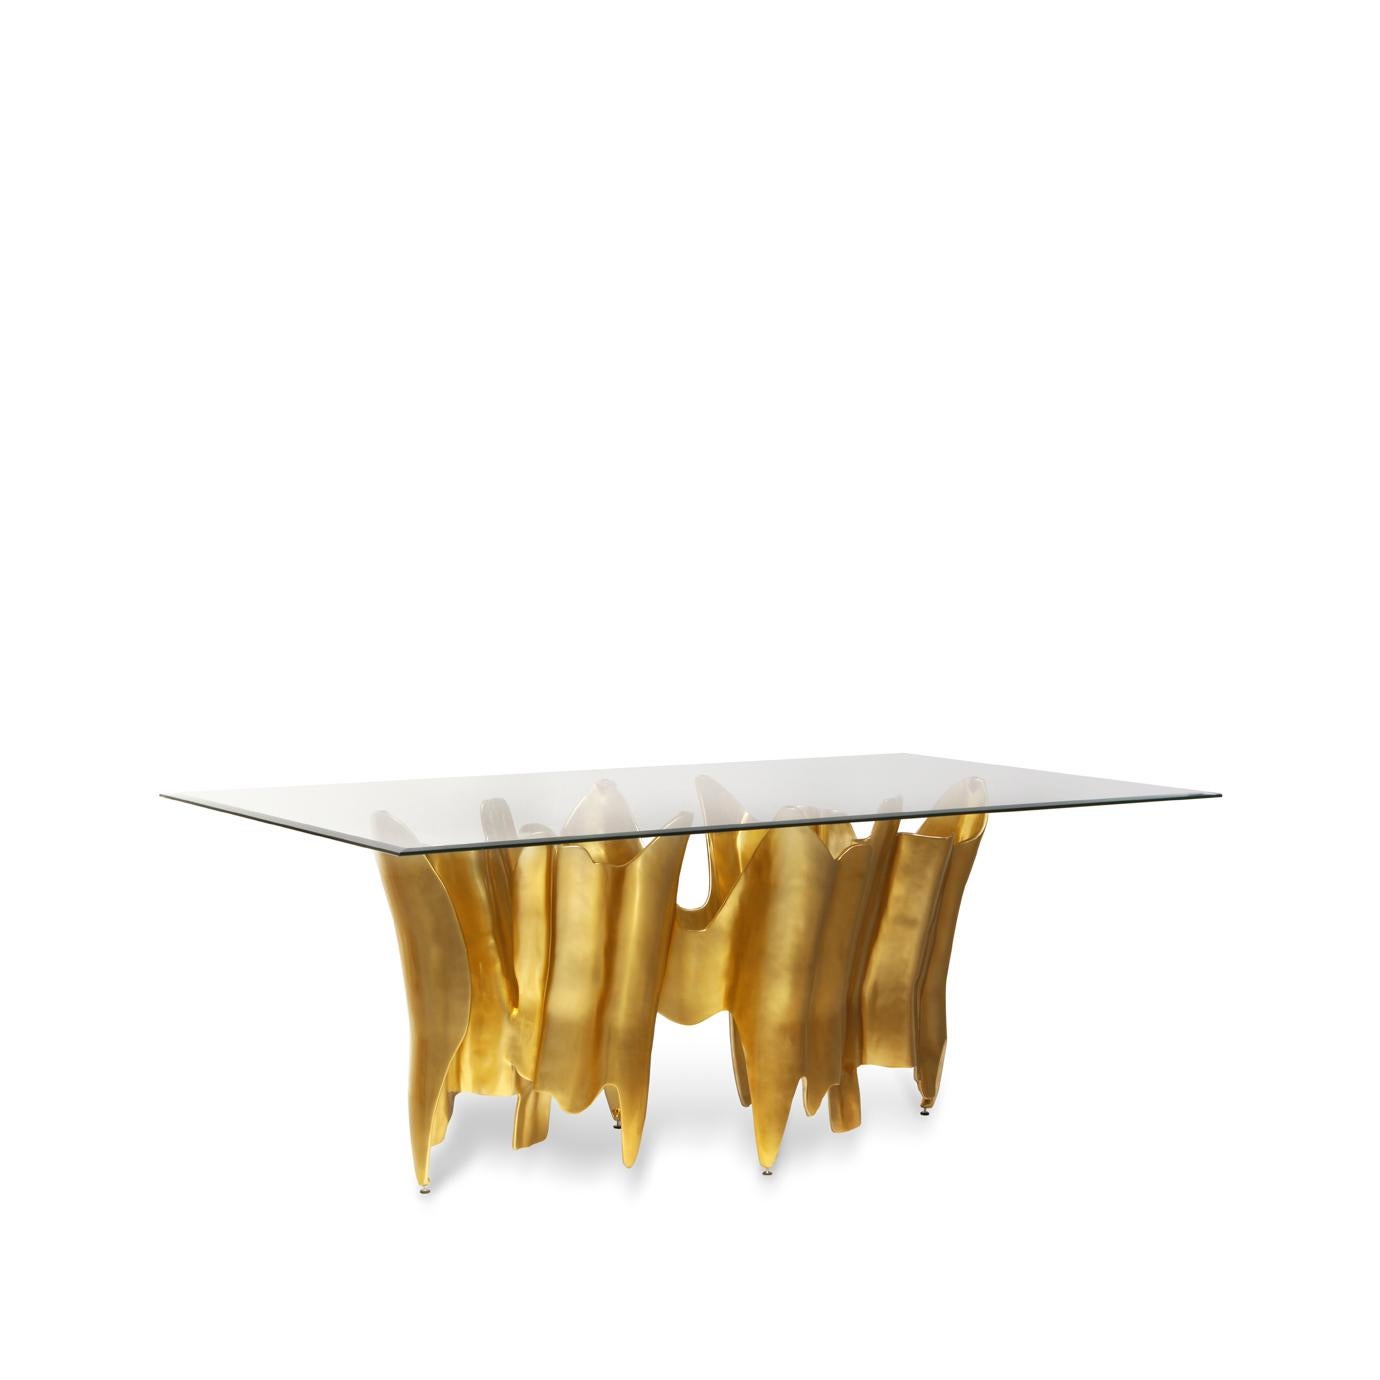 Initially it is a dining table. Then it becomes a dining table cut from clear glass. Your eyes begin to wander down, drinking in the rhythmic design of the aluminum base, following every crevice leading down only to head back up; compelling you to